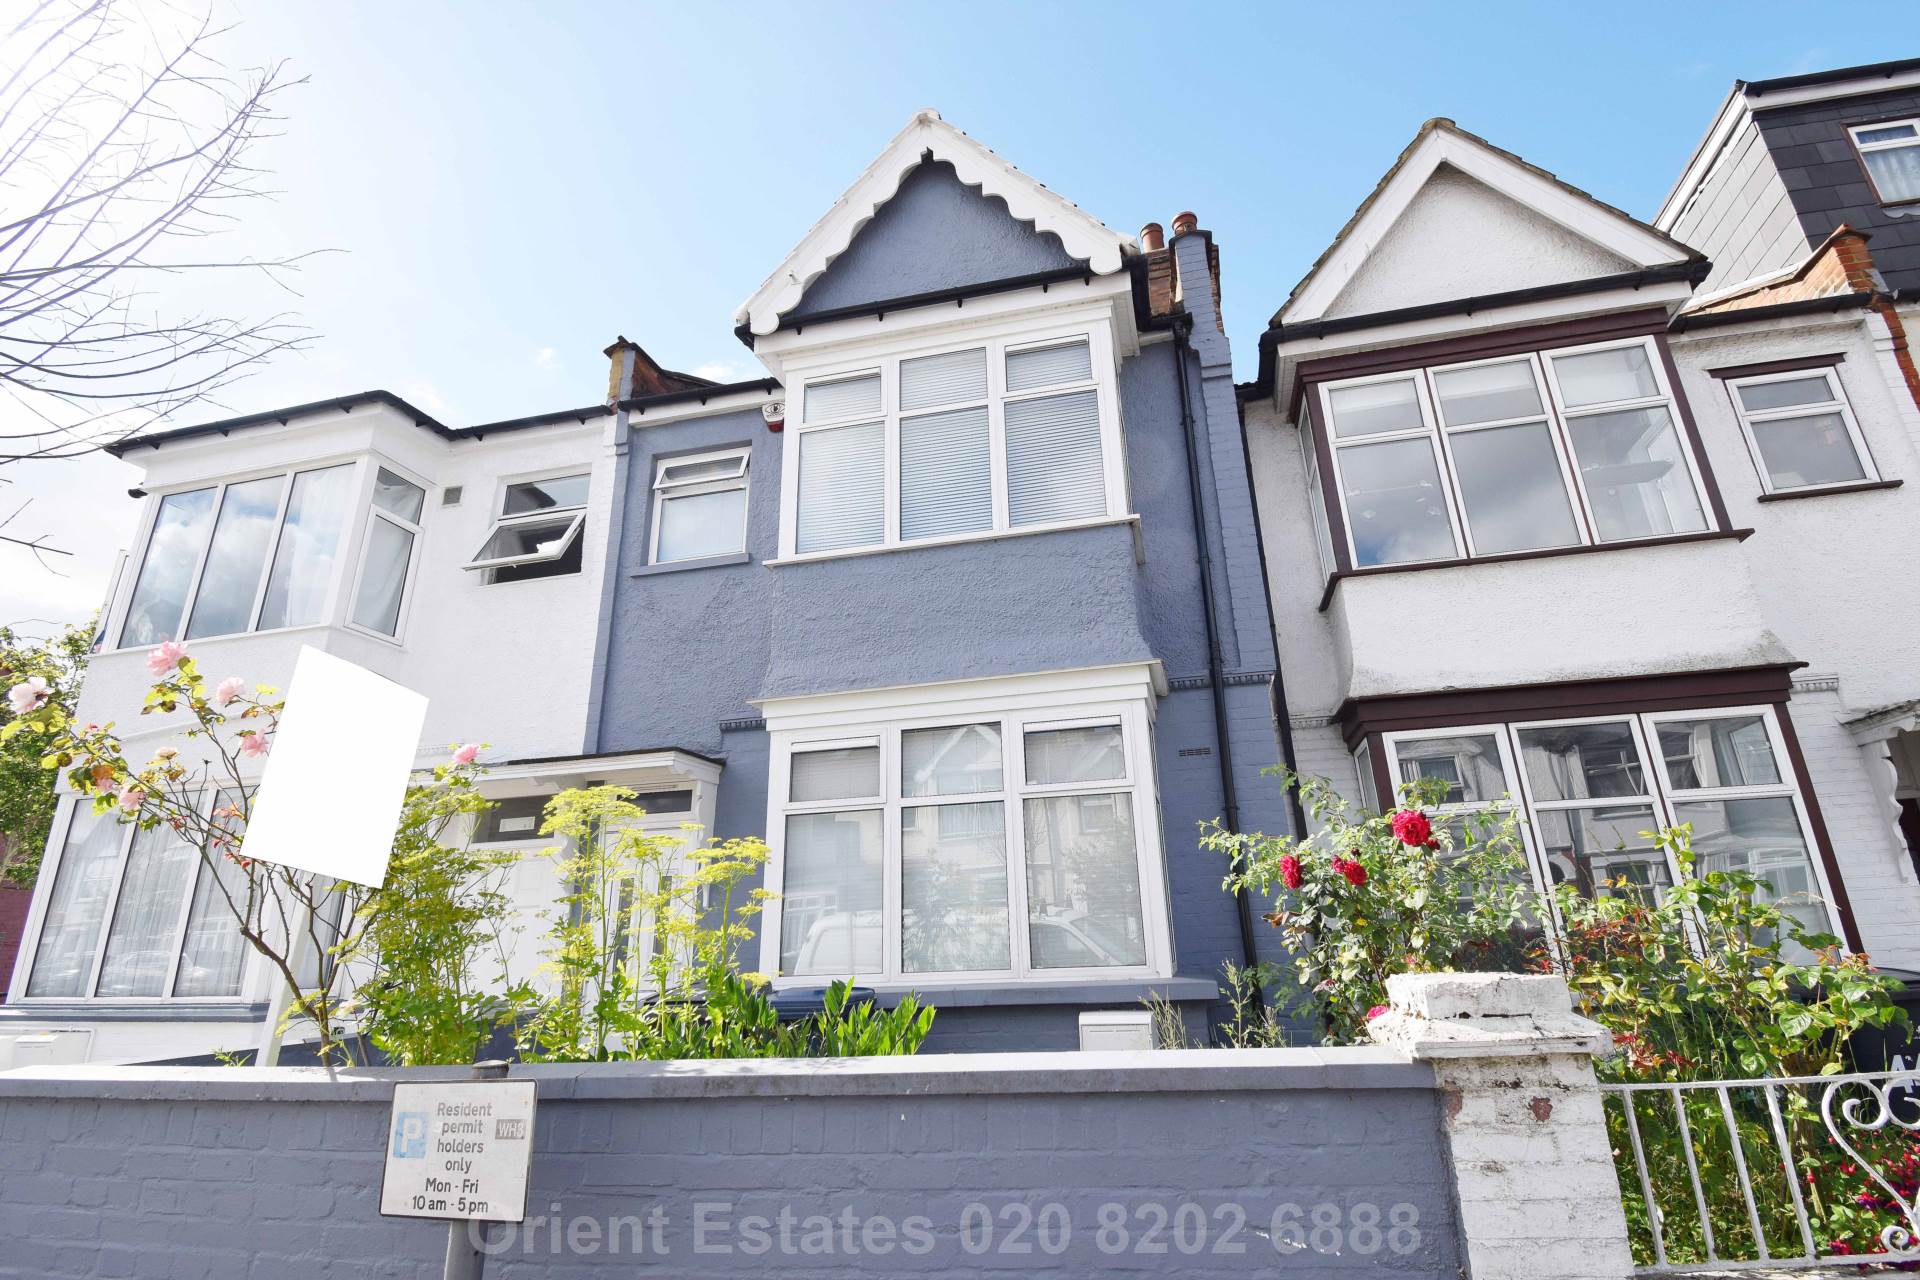 4 bed Mid Terraced House for rent in London. From Orient Estates